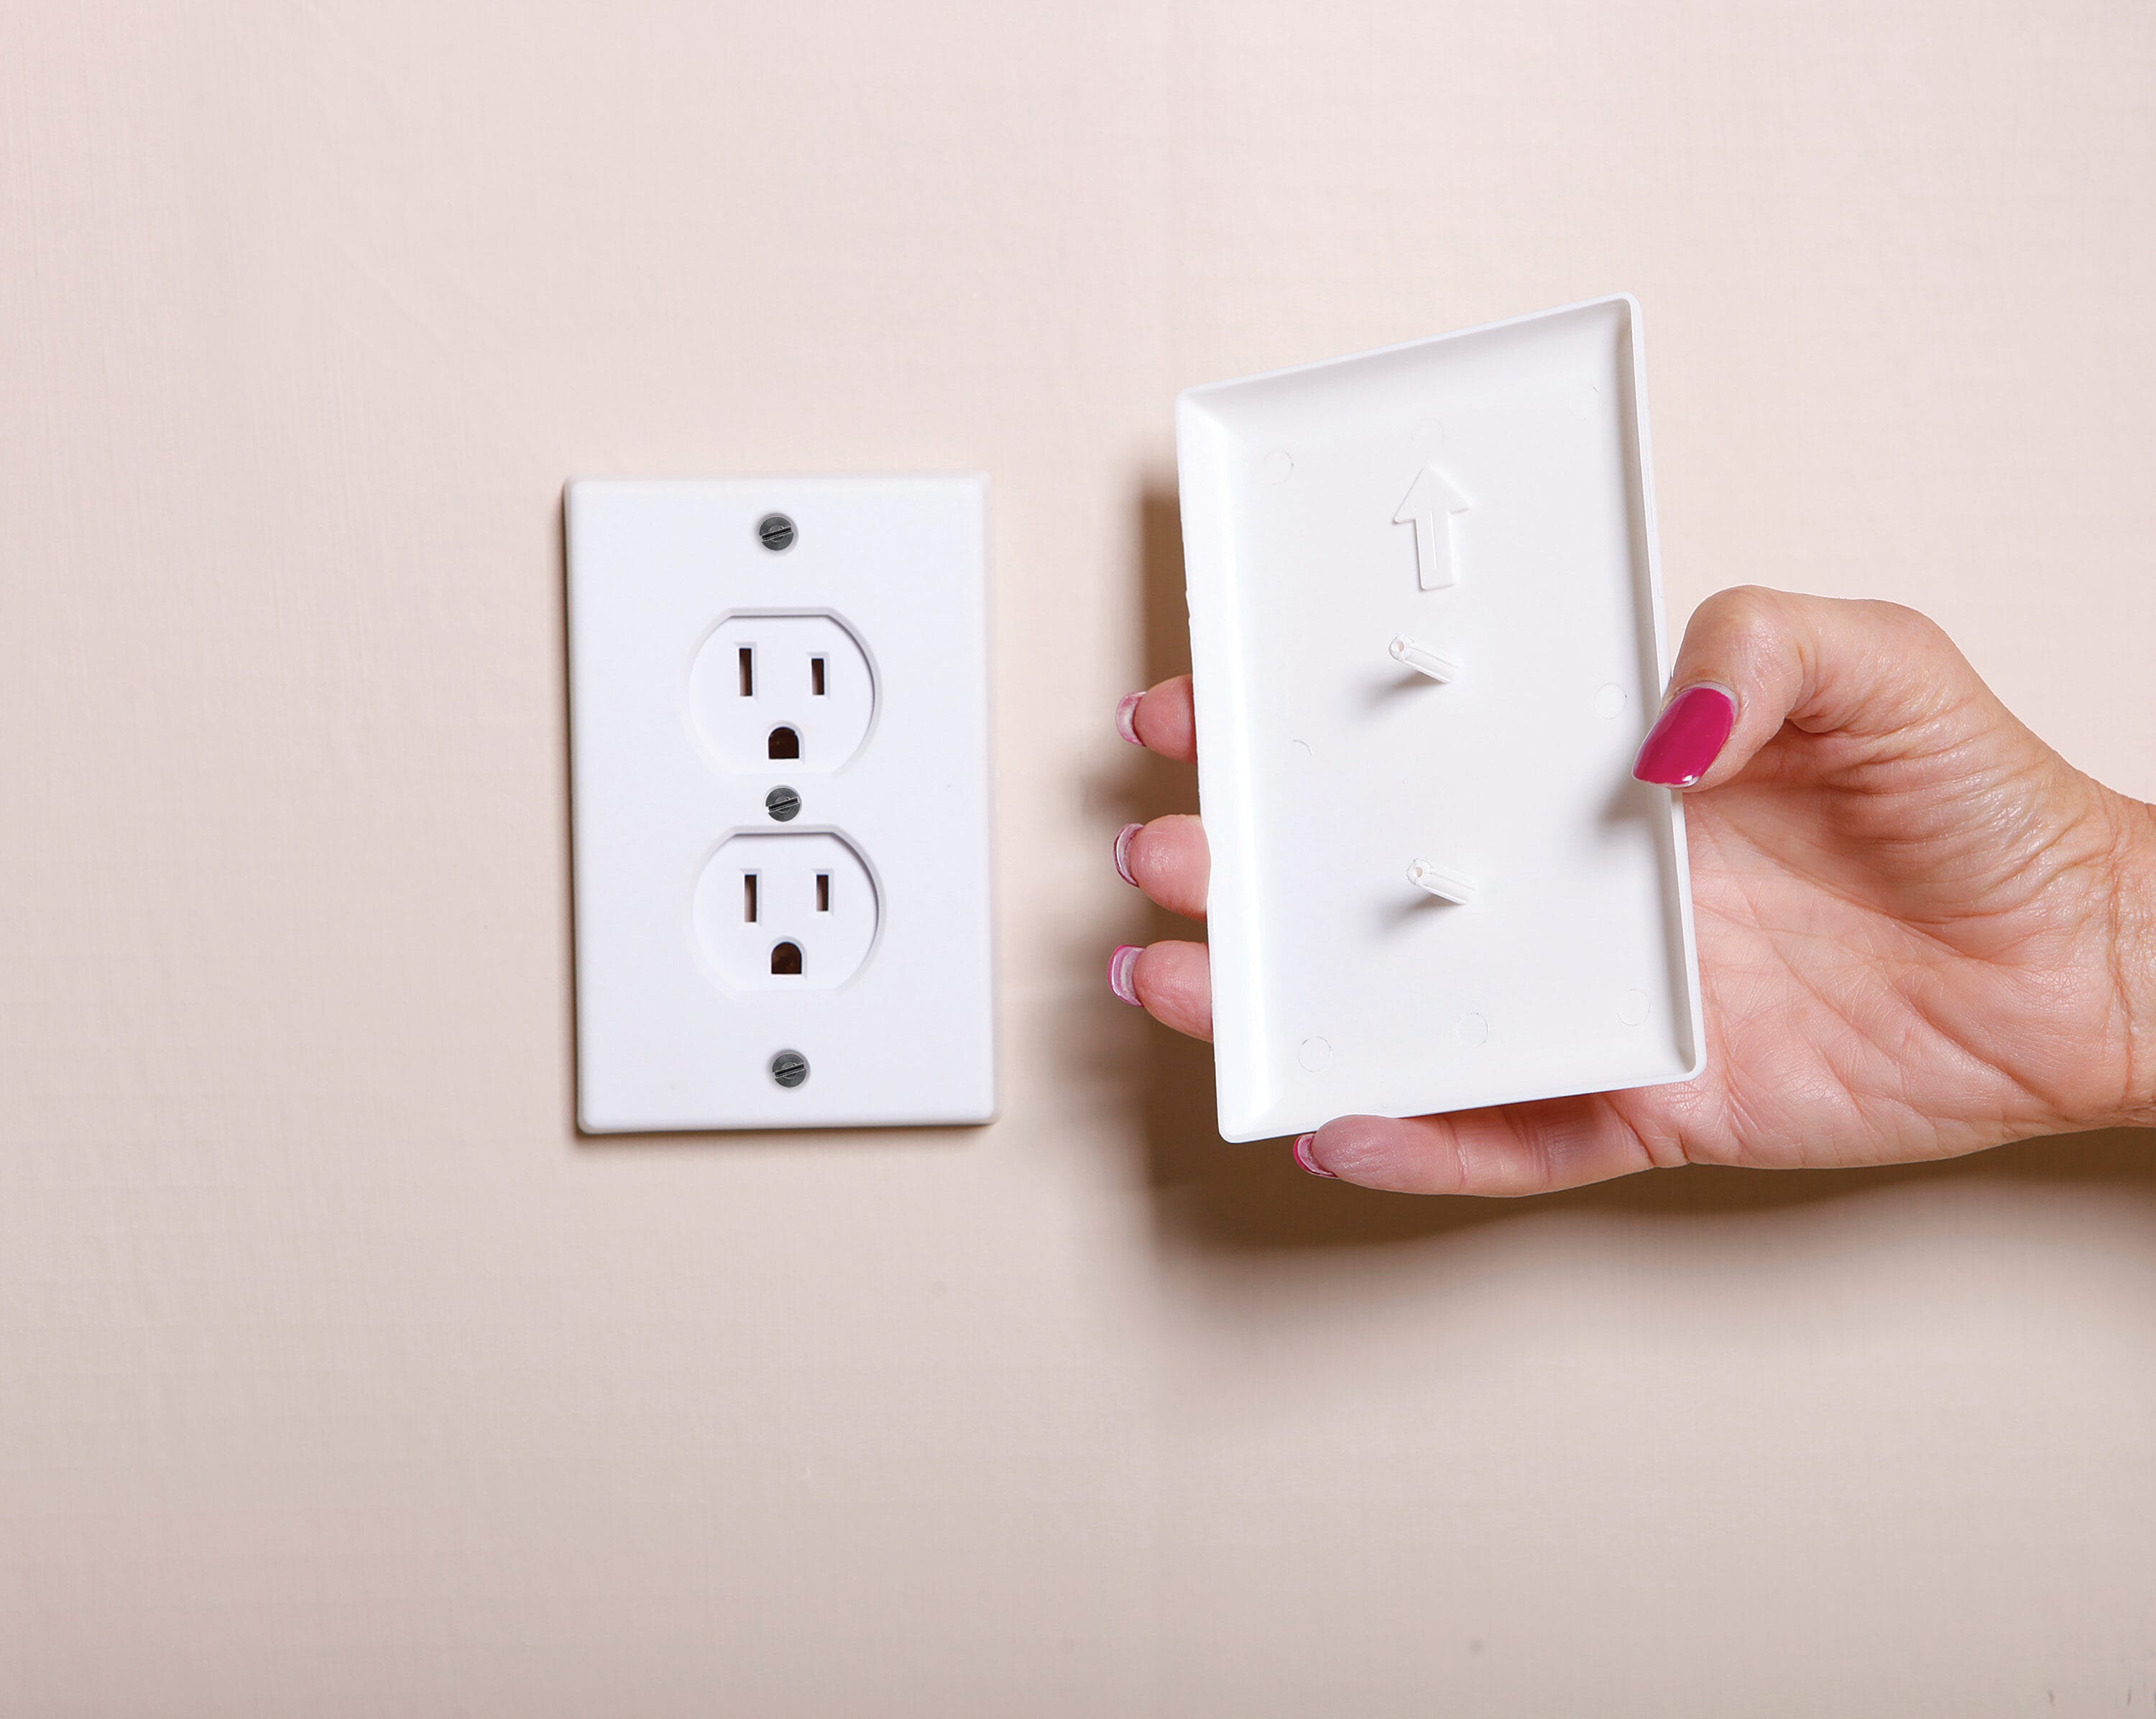 Outlet Covers Review: The Best Options for Safety and Style